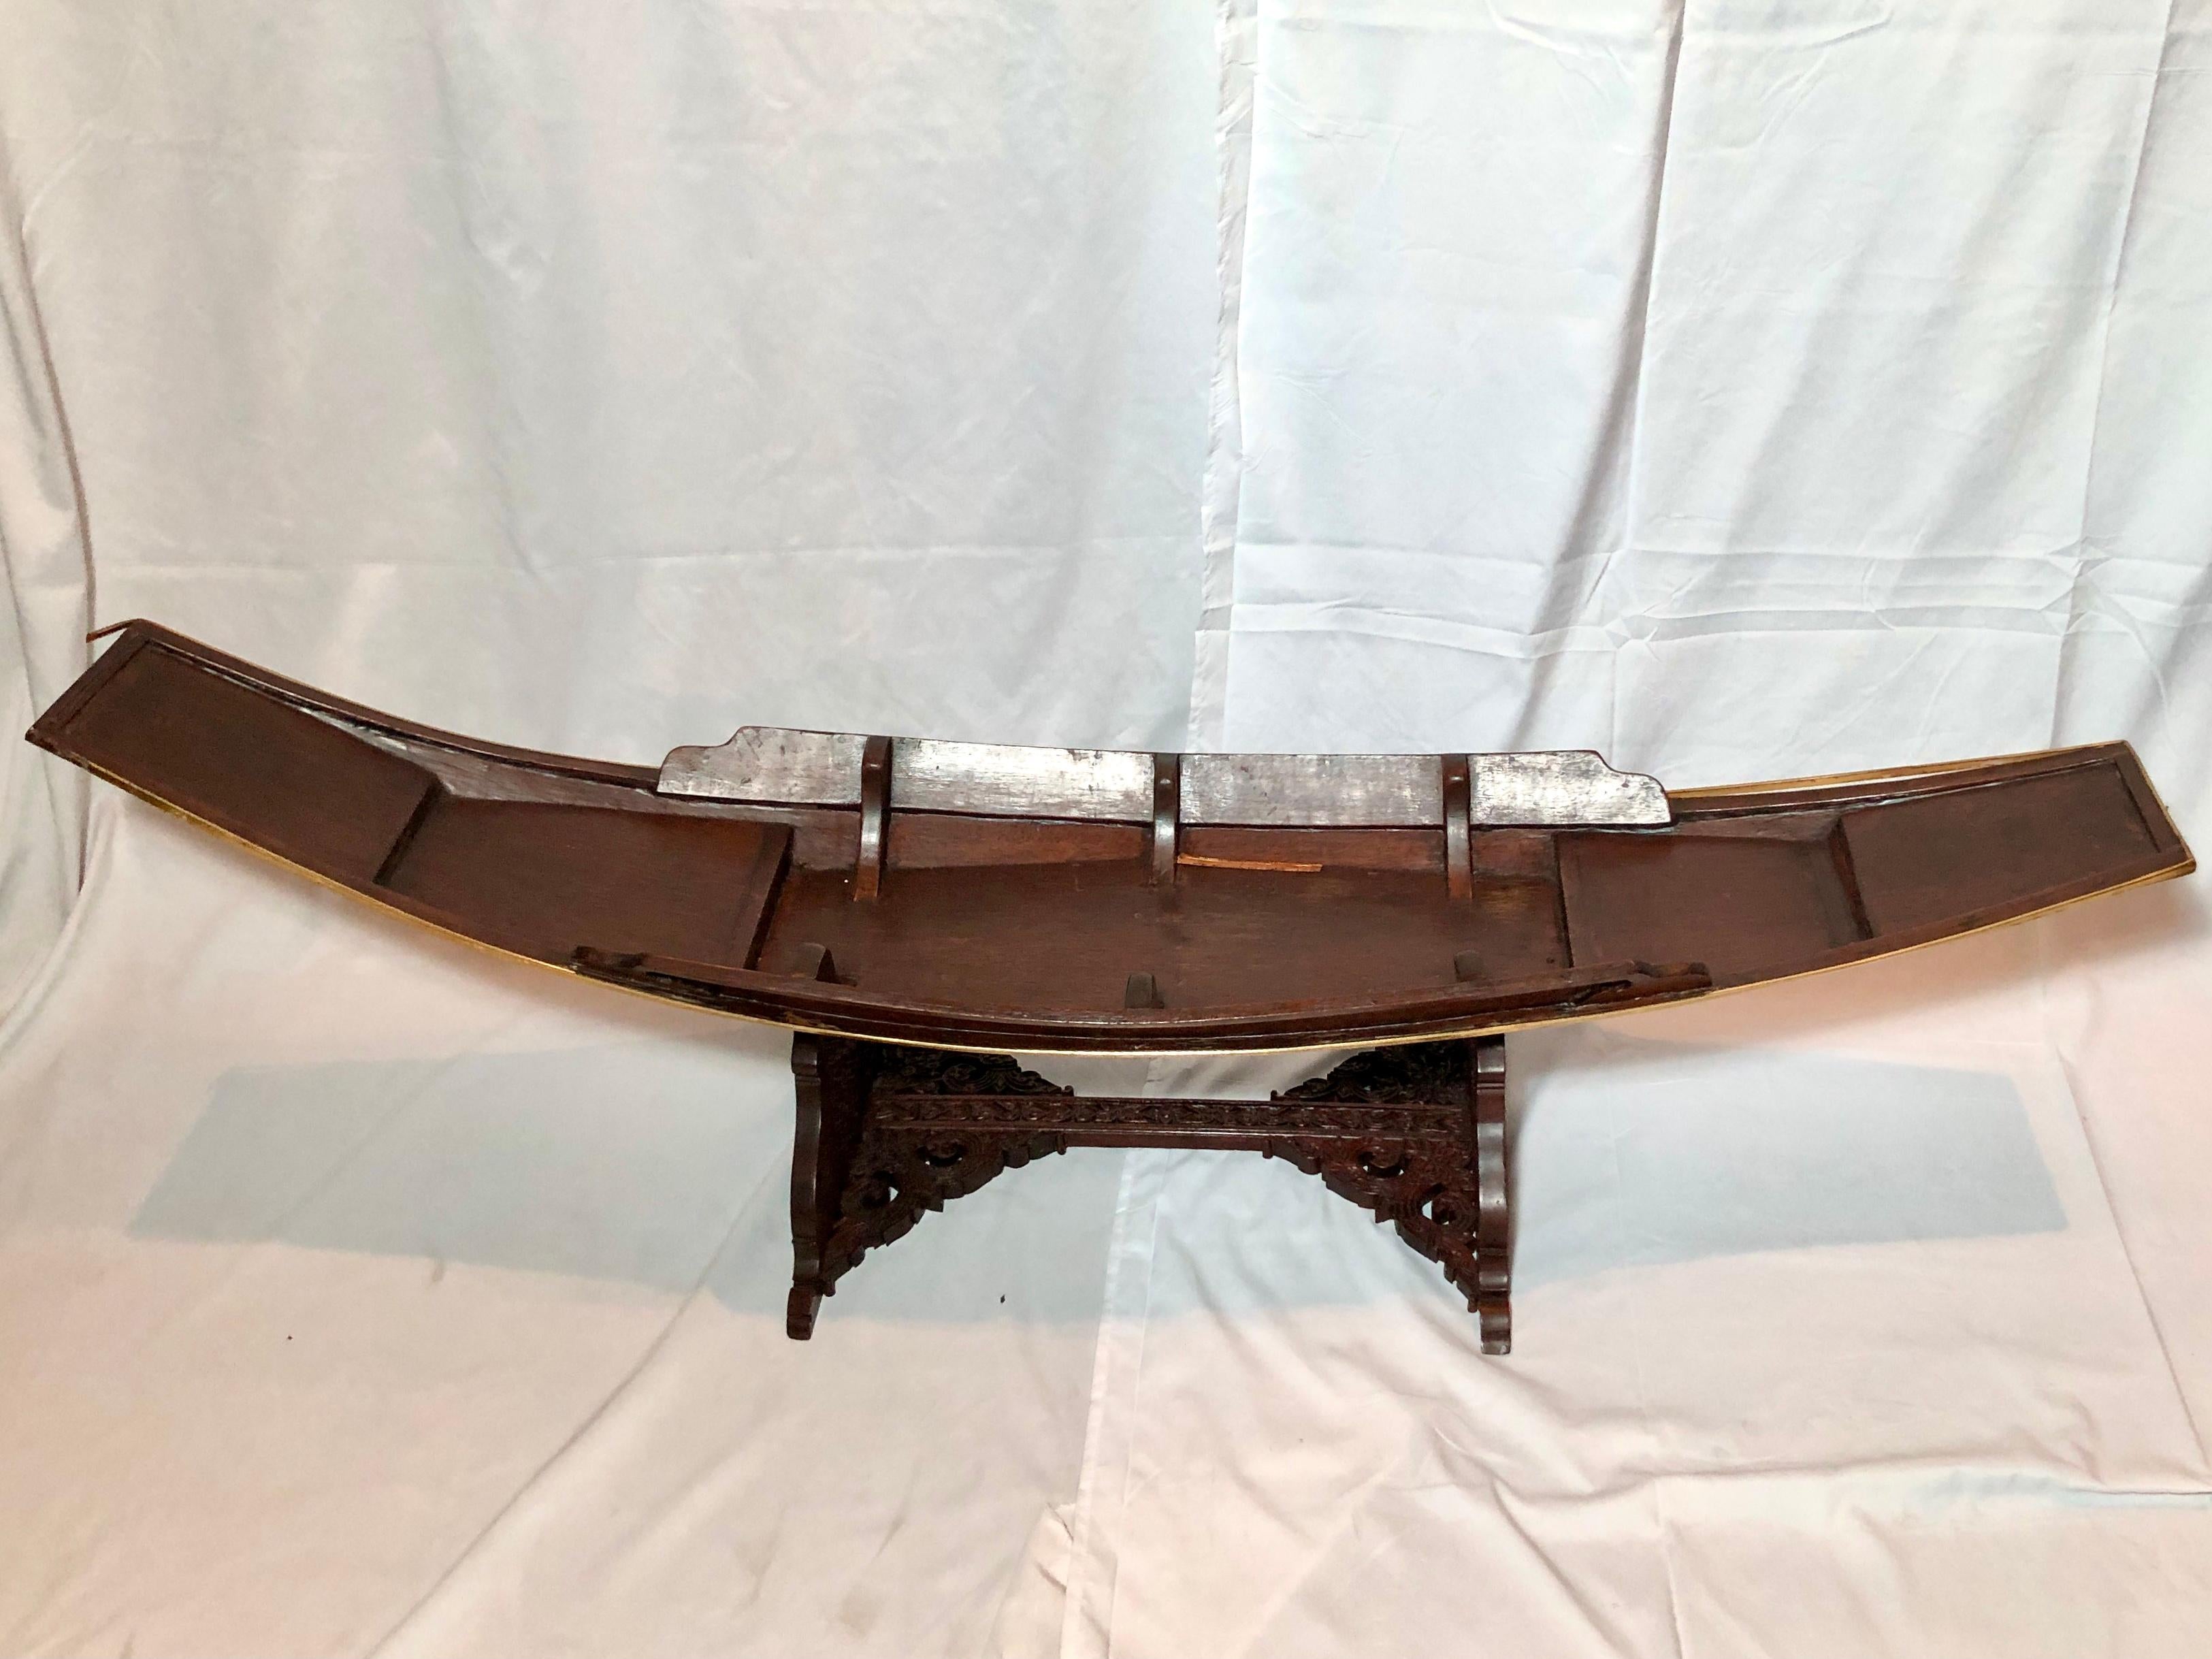 Antique Chinese carved teak sailing boat centerpiece, Circa 1900.